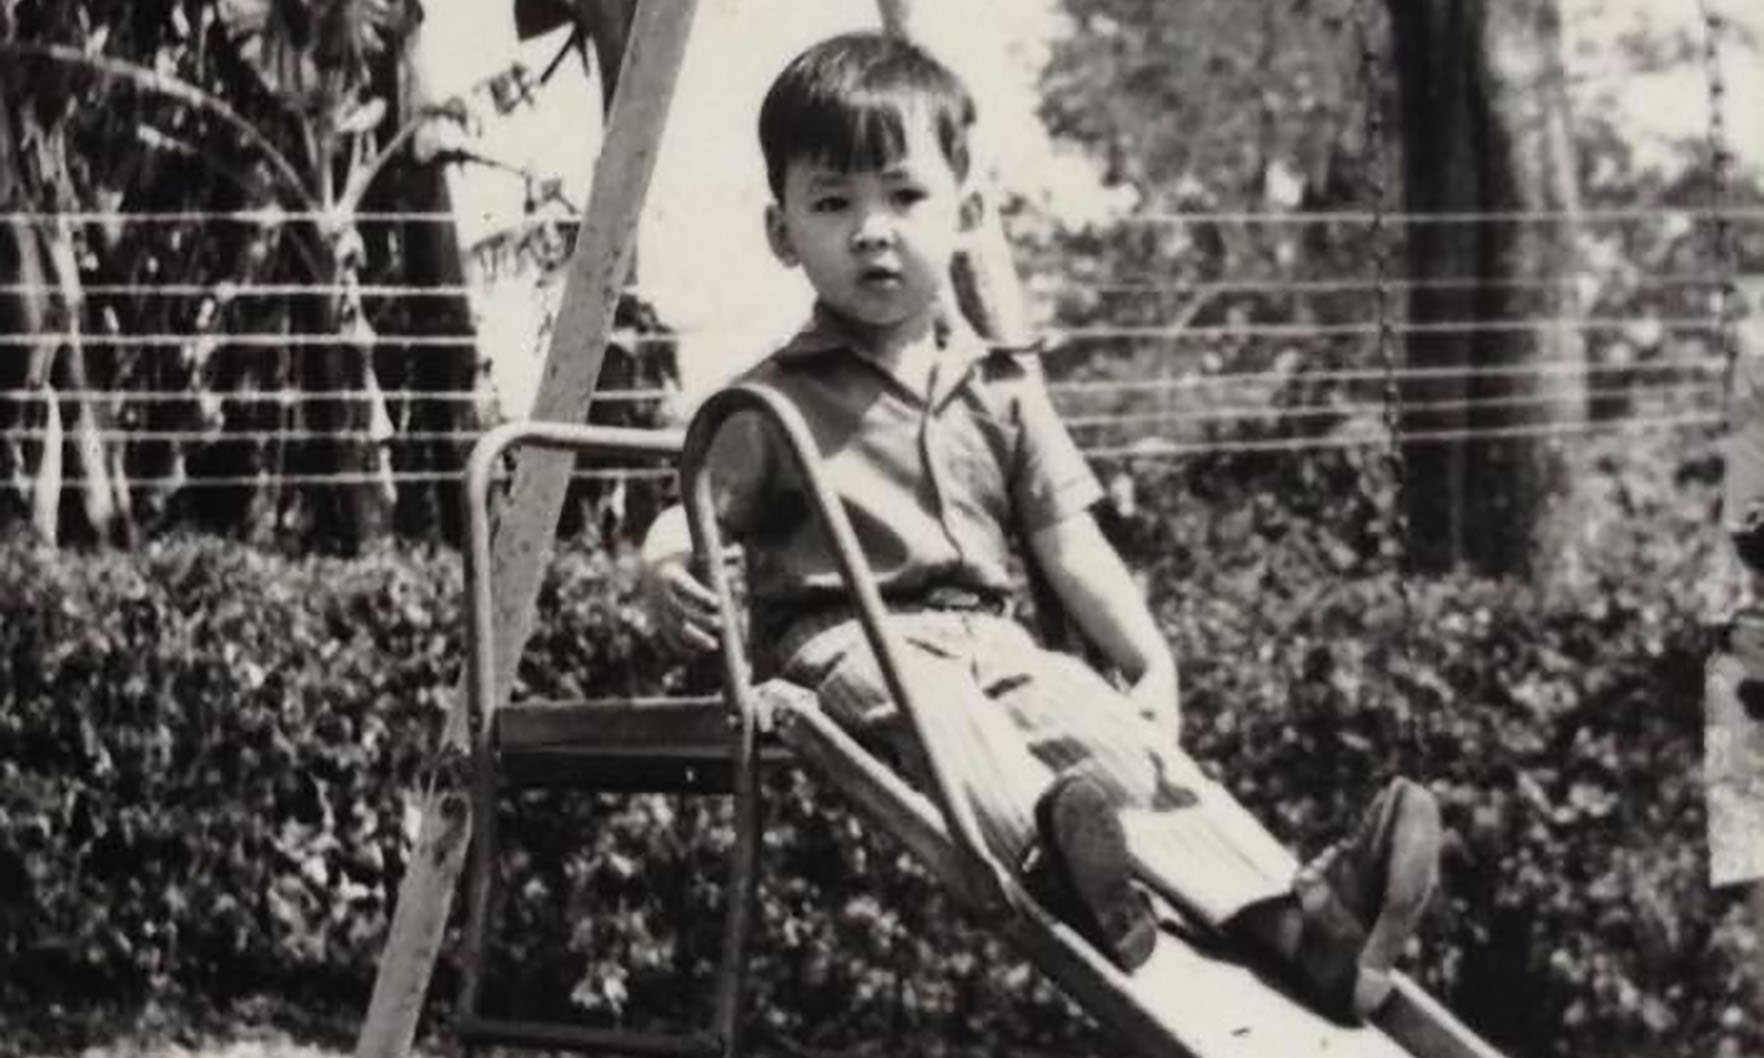 Nguyen as a child in Ban Me Thuot, circa 1974 (Photographs Courtesy Viet Thanh Nguyen)